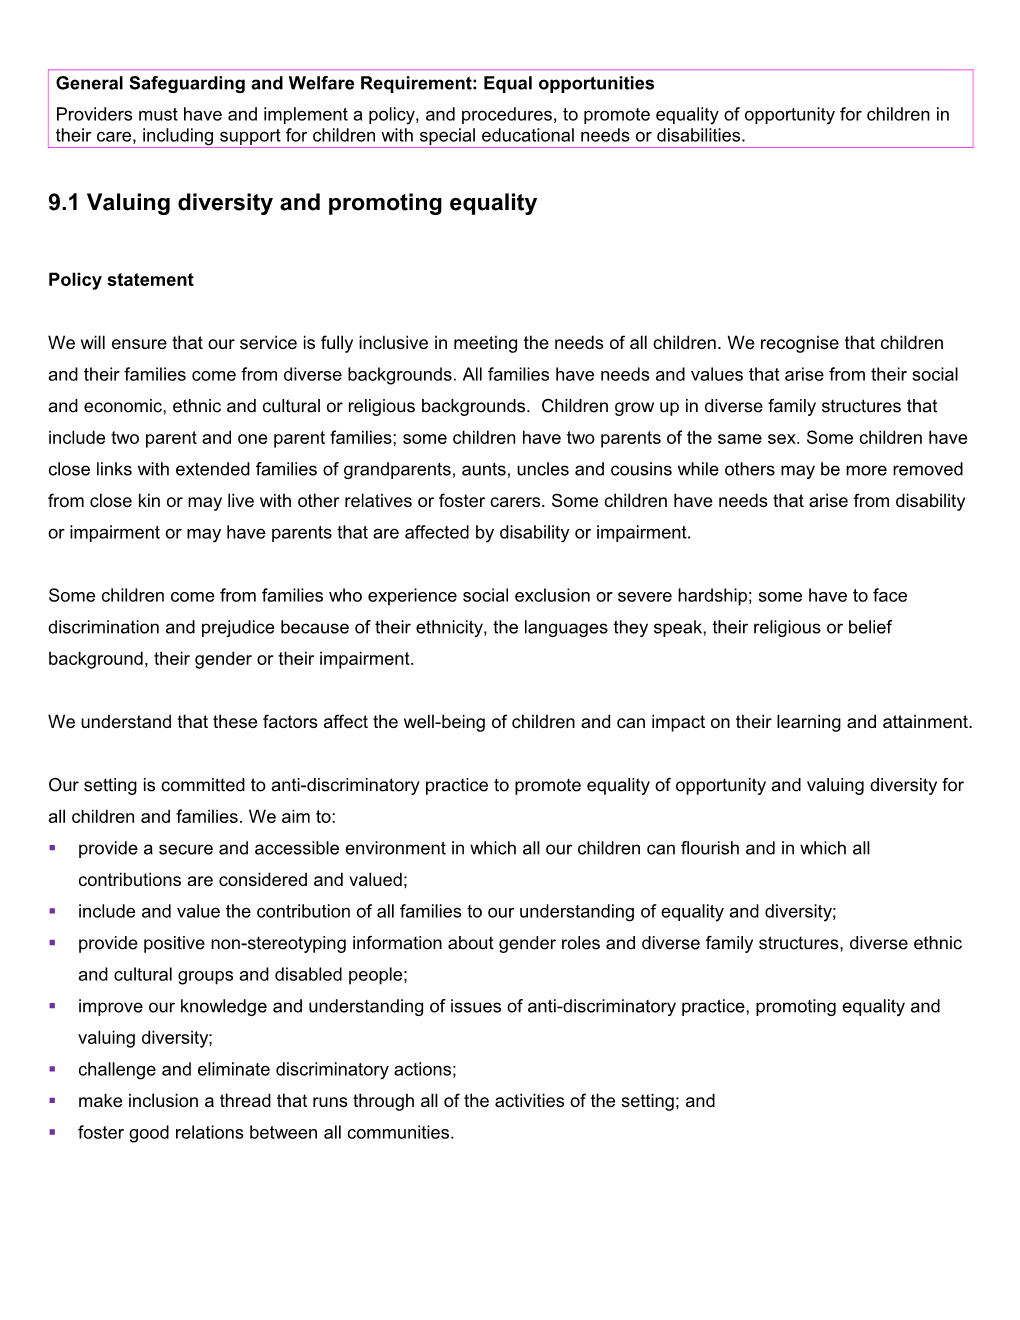 9.1 Valuing Diversity and Promoting Equality